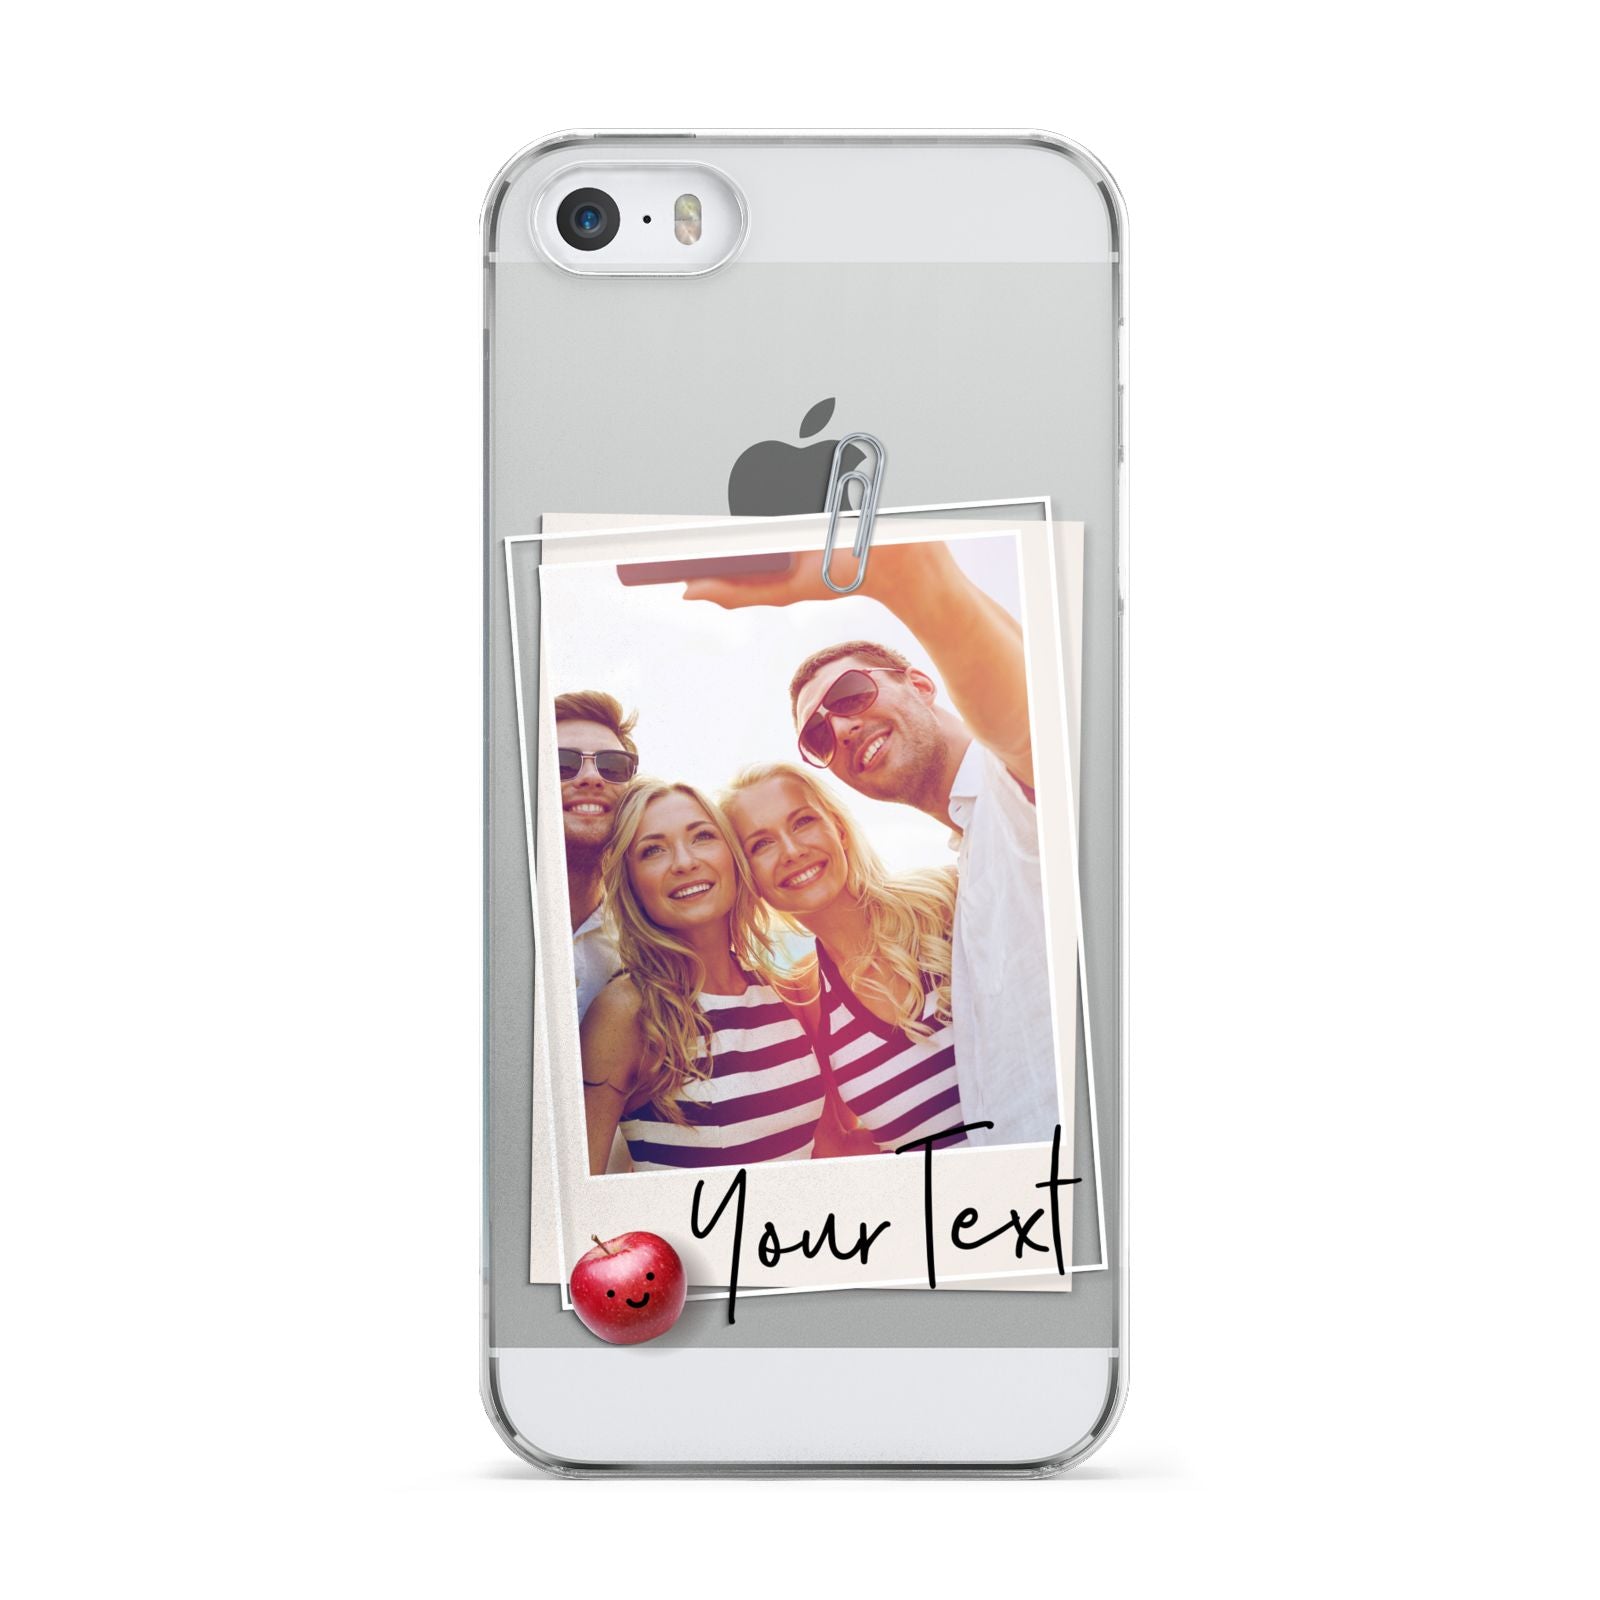 Photograph and Name Apple iPhone 5 Case